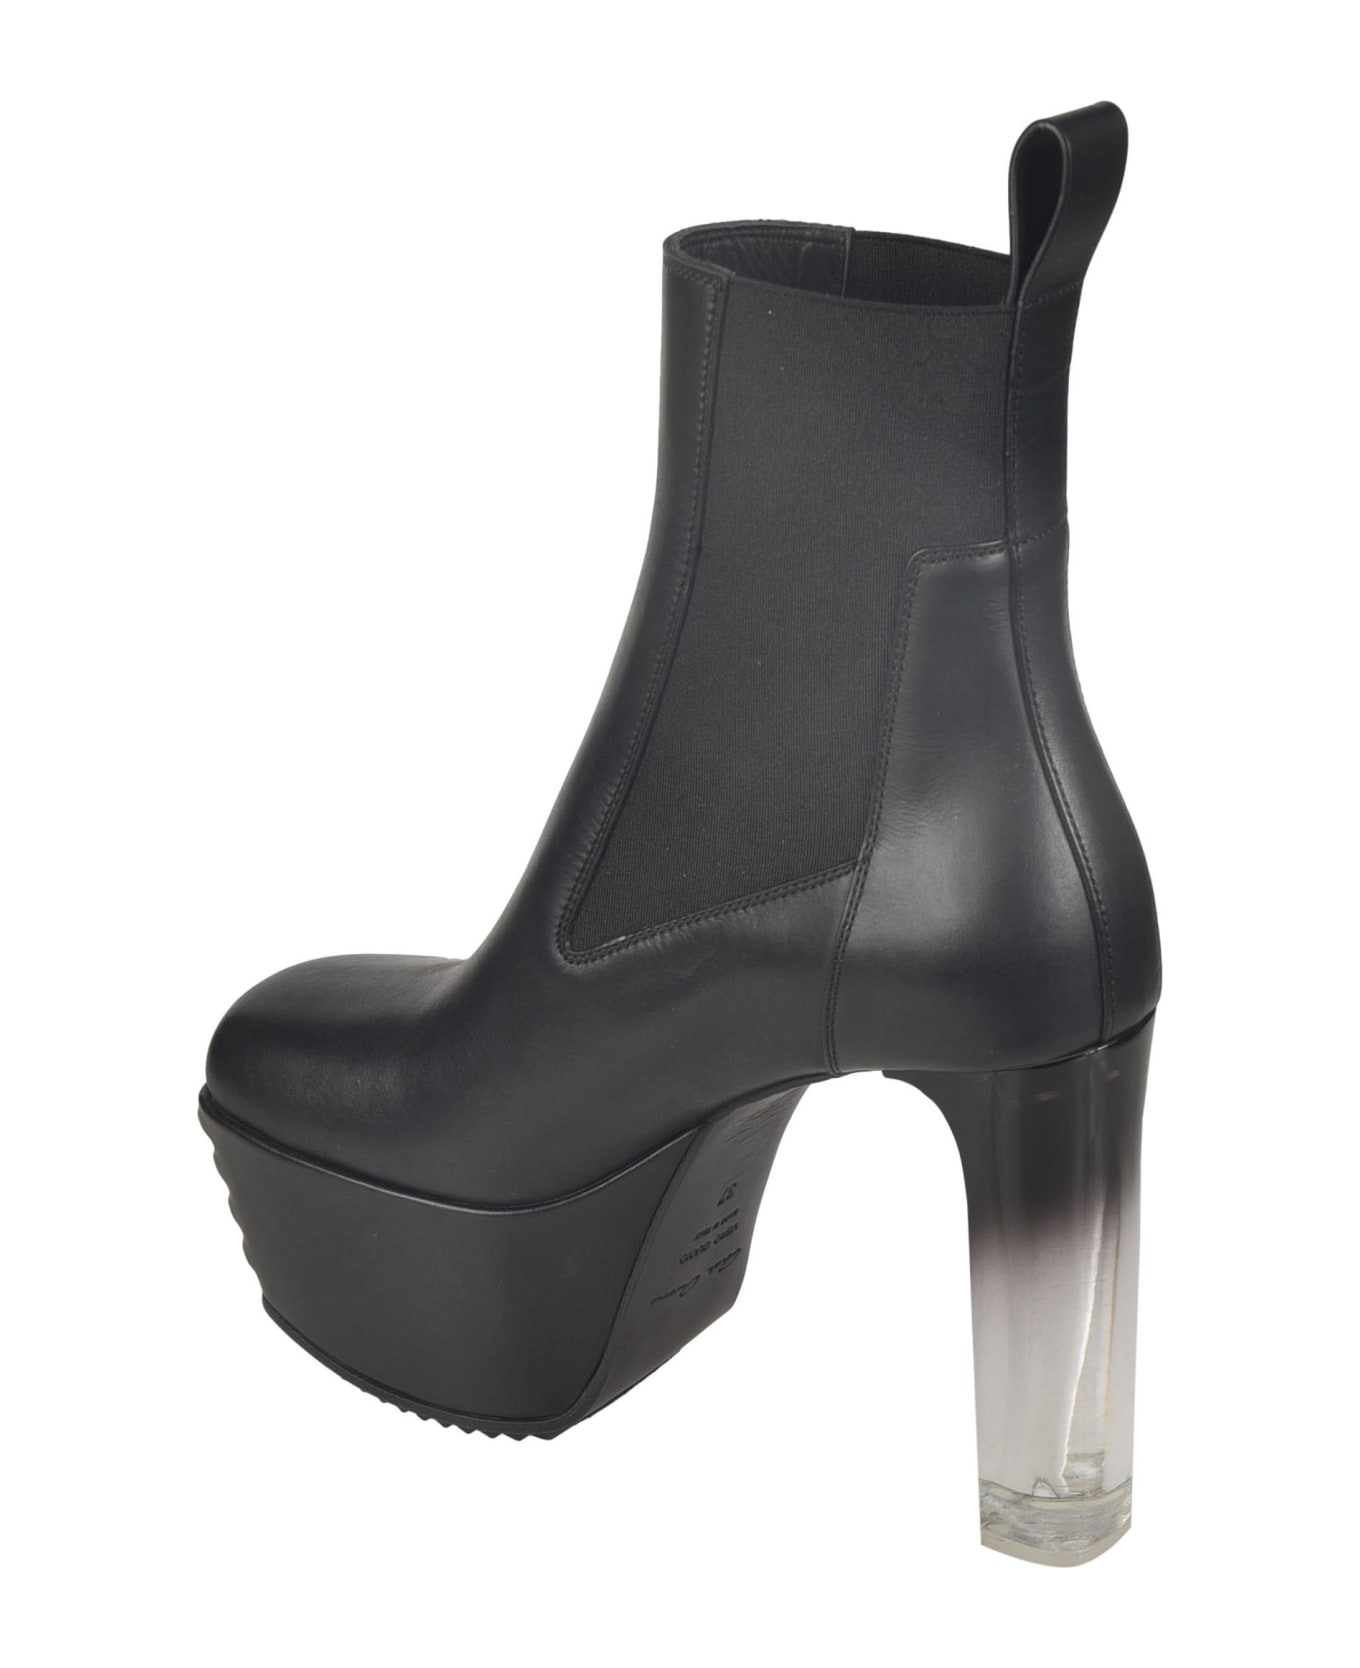 Rick Owens Open Toe Minimal Grill Beatle Boots - Black/Clear ブーツ